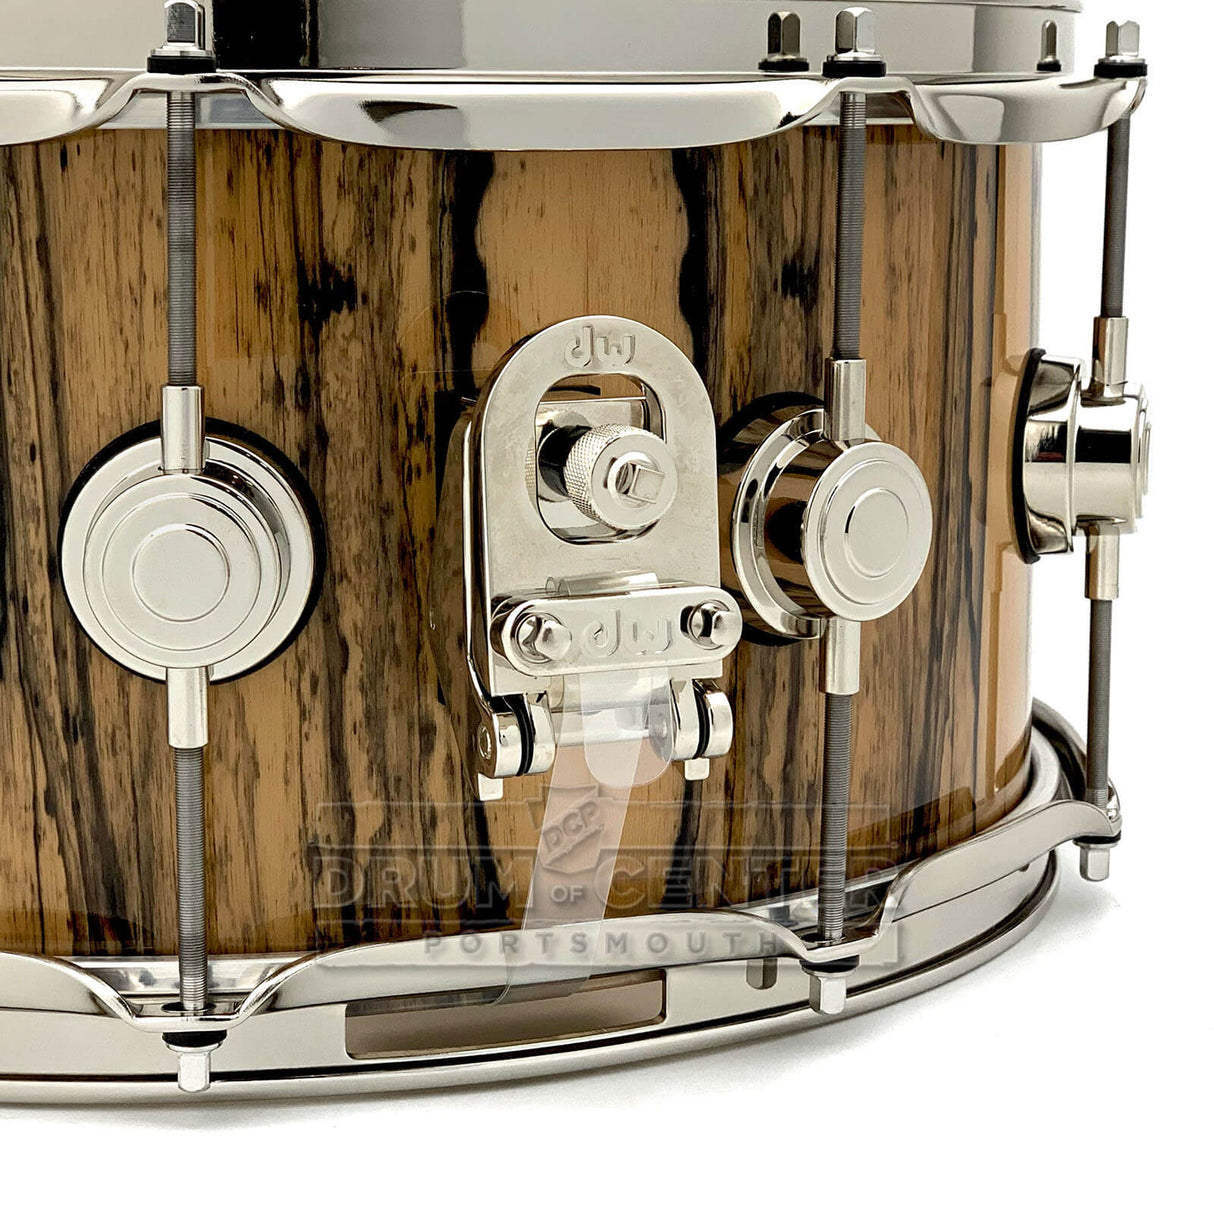 DW Collectors Cherry/Mahogany Snare Drum 14x6.5 Exotic Ivory Ebony w/Nickel Hardware - Drum Center Of Portsmouth